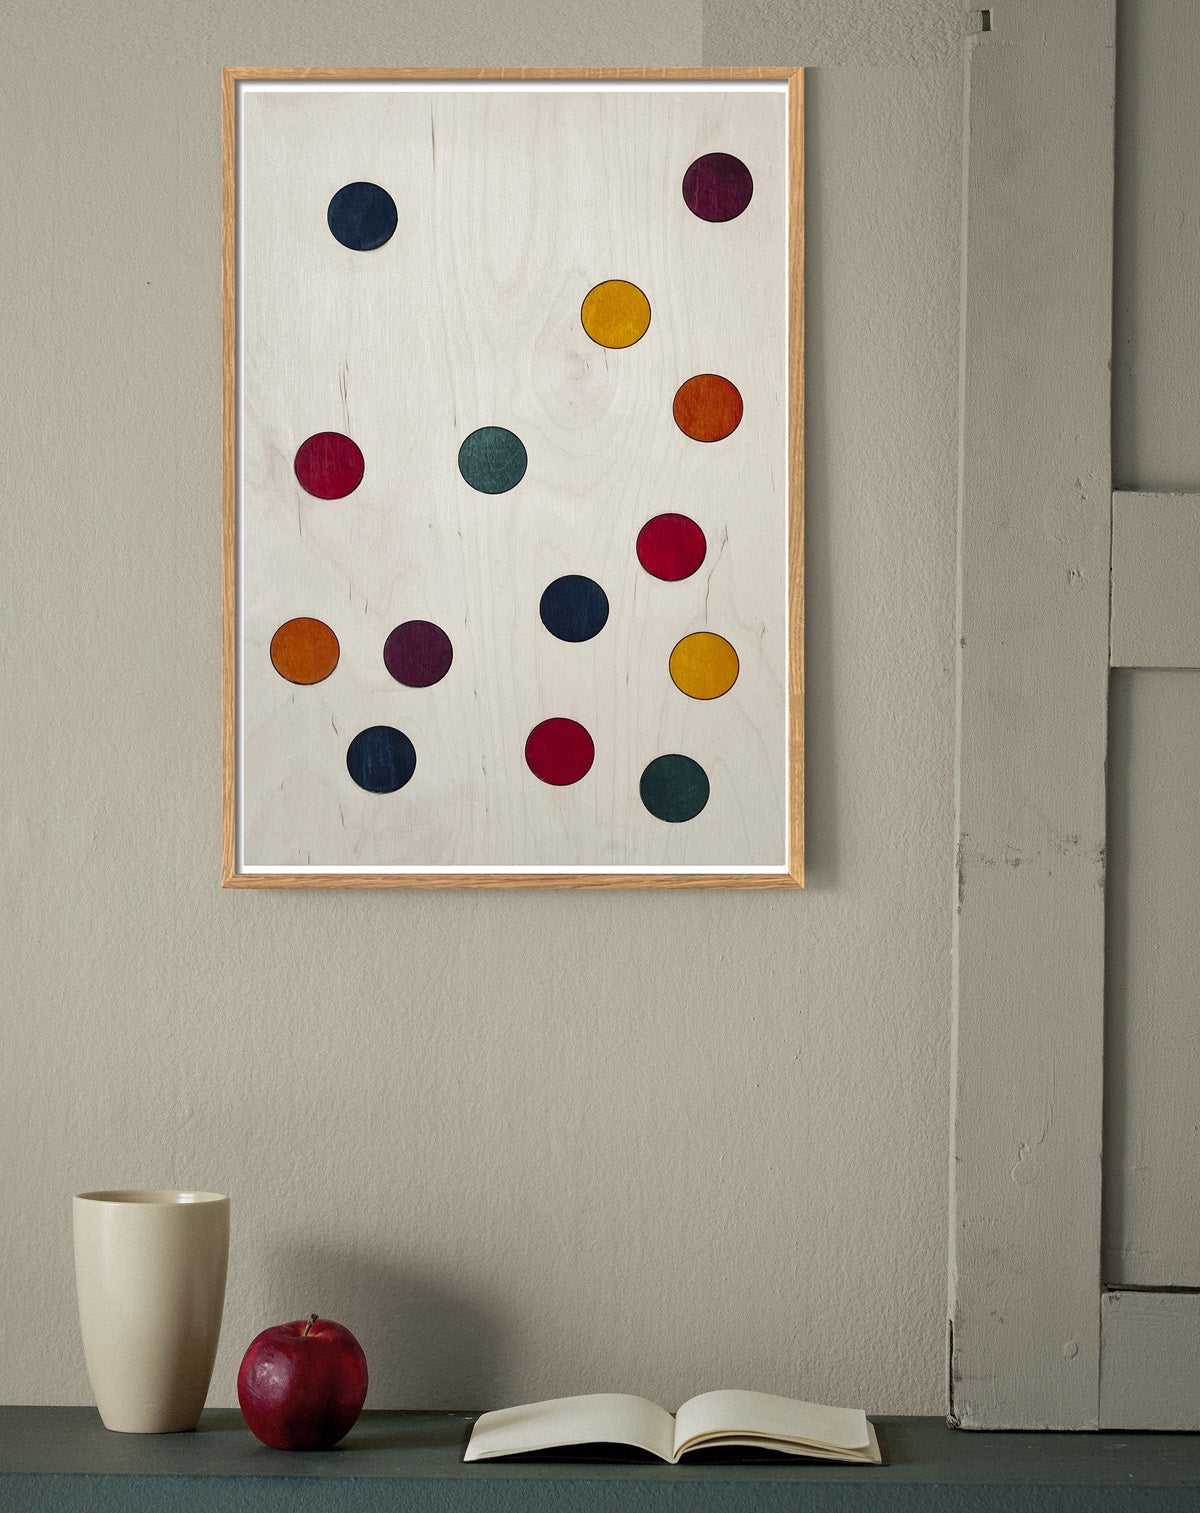 Add a graphic and colorfull touch to the interior of your home with this poster with colors of the rainbow